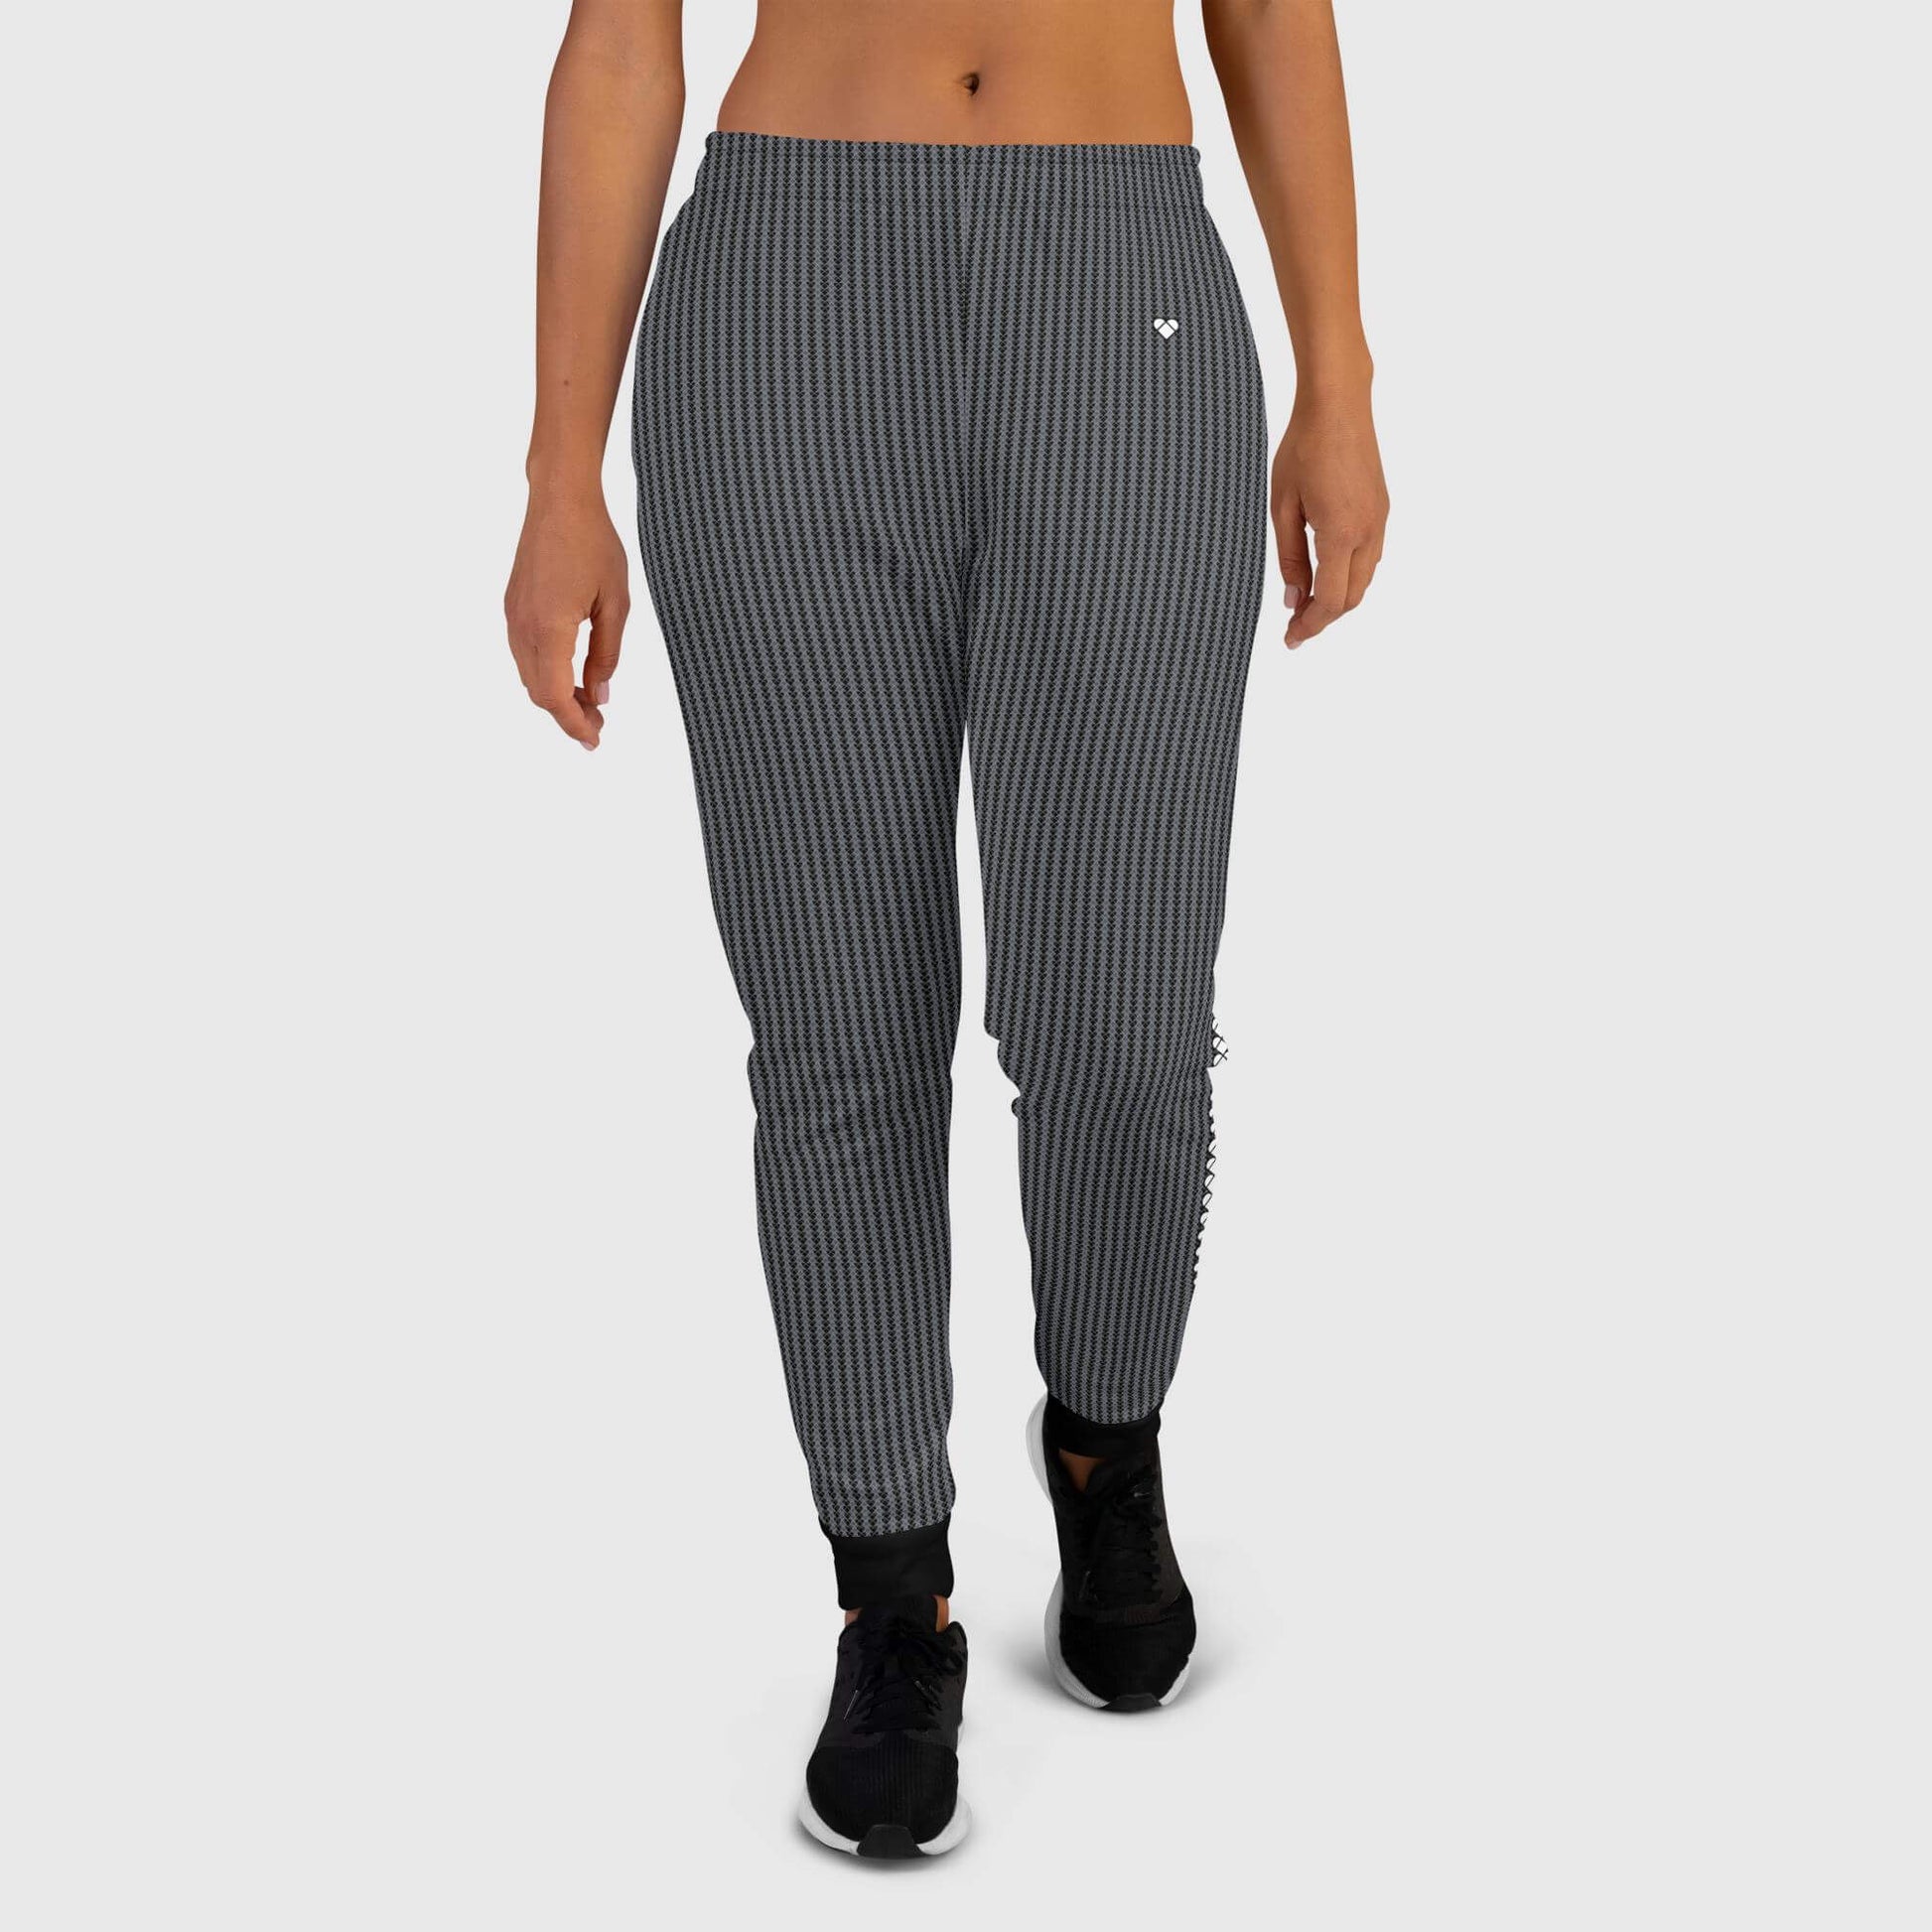 A pair of black joggers for women, with a heart-shaped pattern in shades of grey and a black stripe with brand hearts along the legs, practical pockets, and a brushed fleece inside, front view